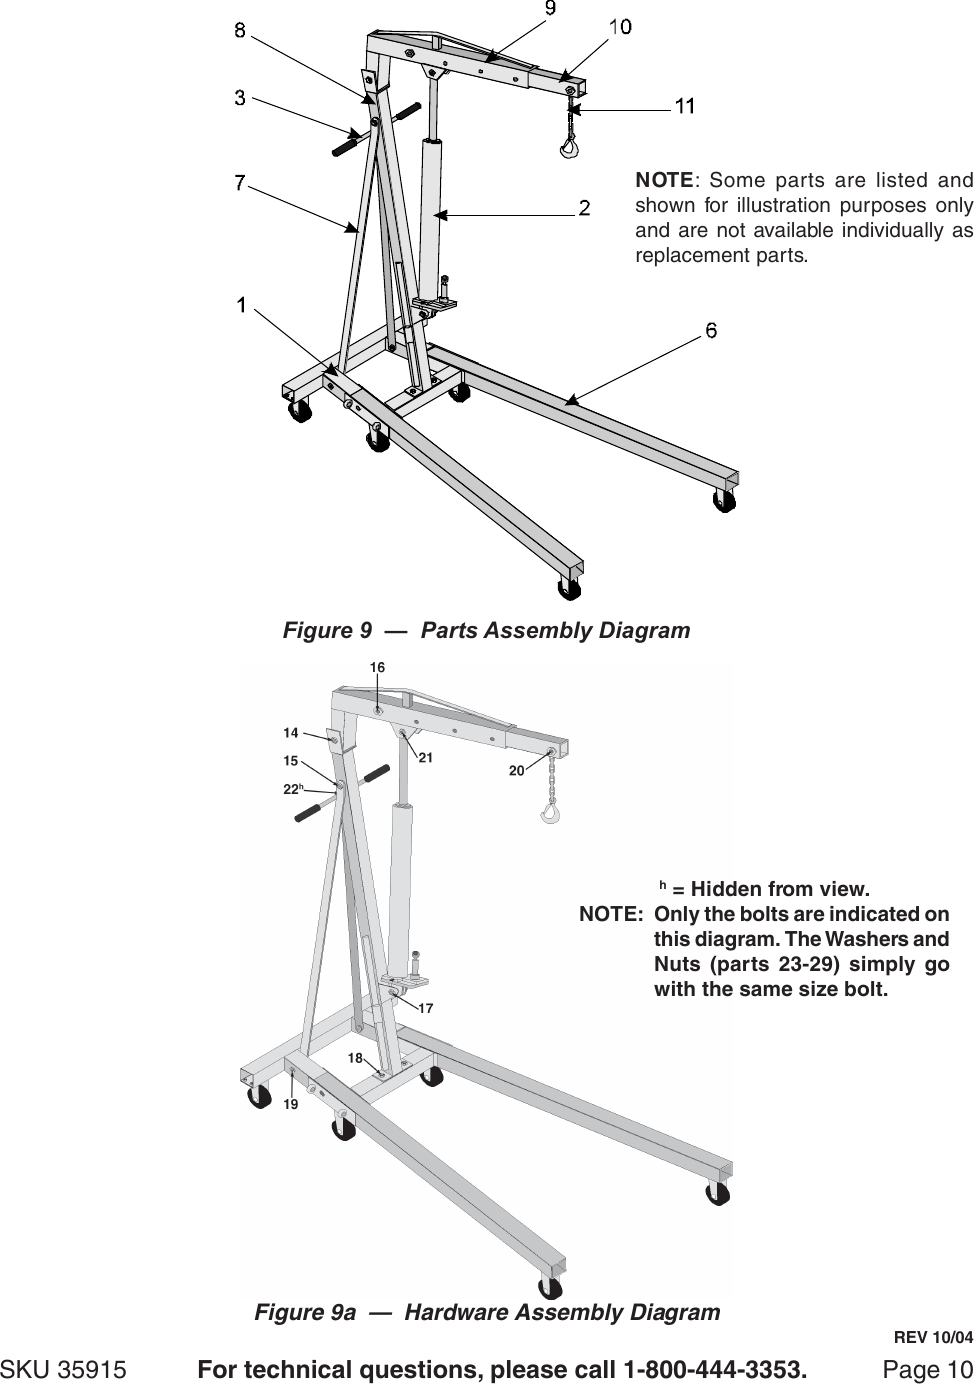 Page 10 of 11 - Central-Hydraulics Central-Hydraulics-2-Ton-Foldable-Shop-Crane-35915-Users-Manual- 35915 Jack Manual  Central-hydraulics-2-ton-foldable-shop-crane-35915-users-manual